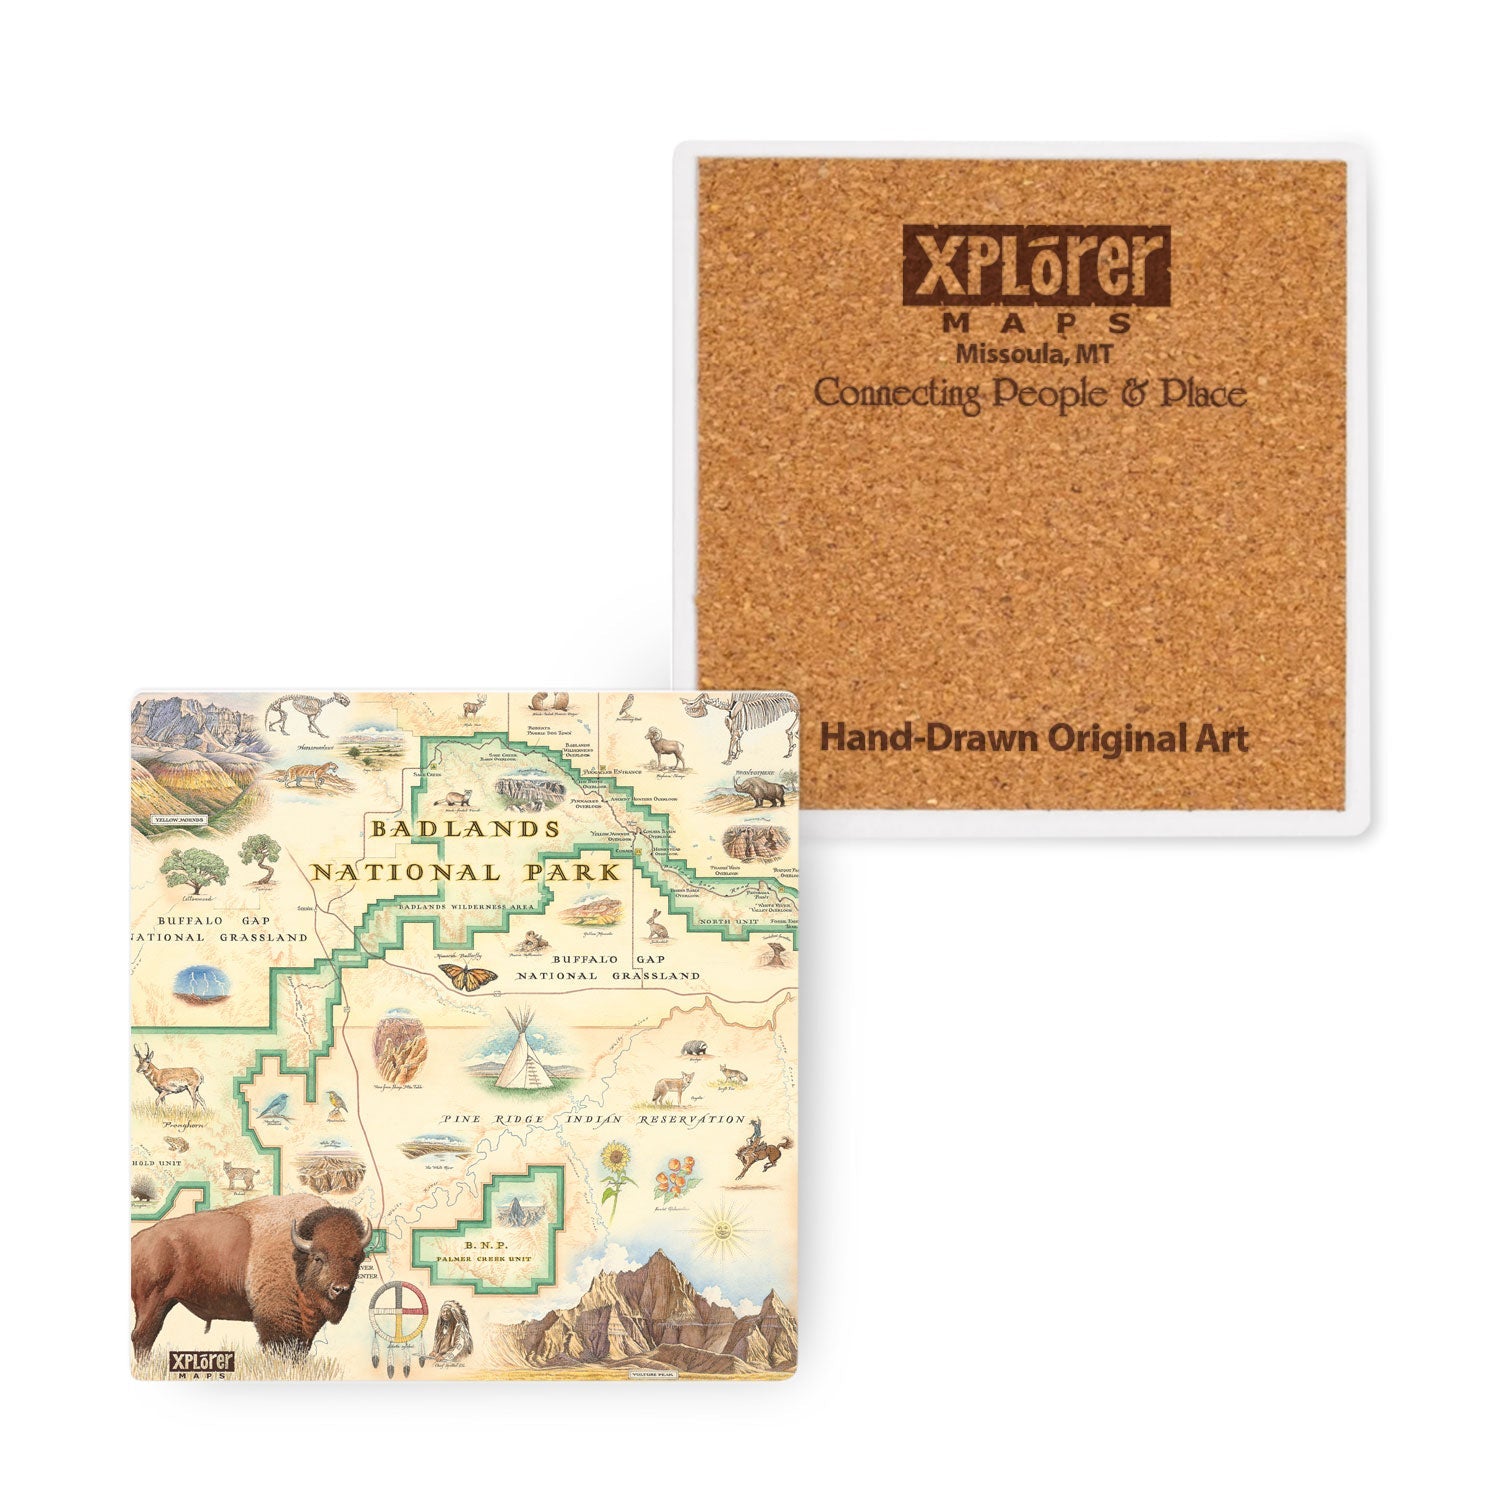 Badlands National Park Map Ceramic Coasters earth-tone colors of browns and reds by Xplorer Maps. Featuring Buffalo Gap Grasslands, Vulture Peak, and Yellow Mounds Overlook. Flora and fauna of Jasper Tree, Yucca plant, deer, dinosaurs, birds, and fox.